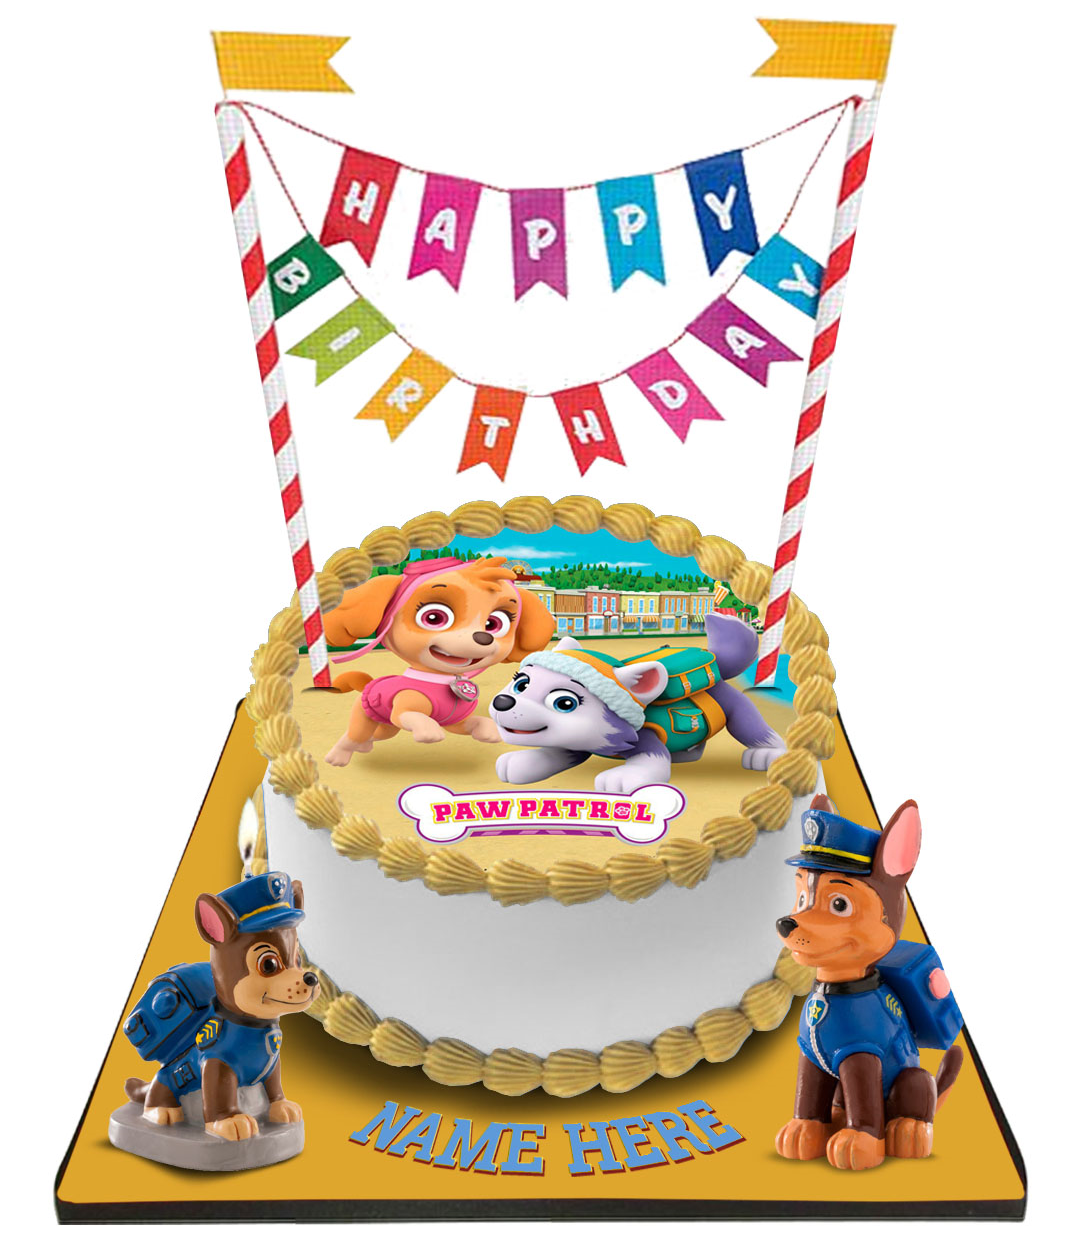 Paw Patrol Cake with Happy Birthday Bunting &Topper